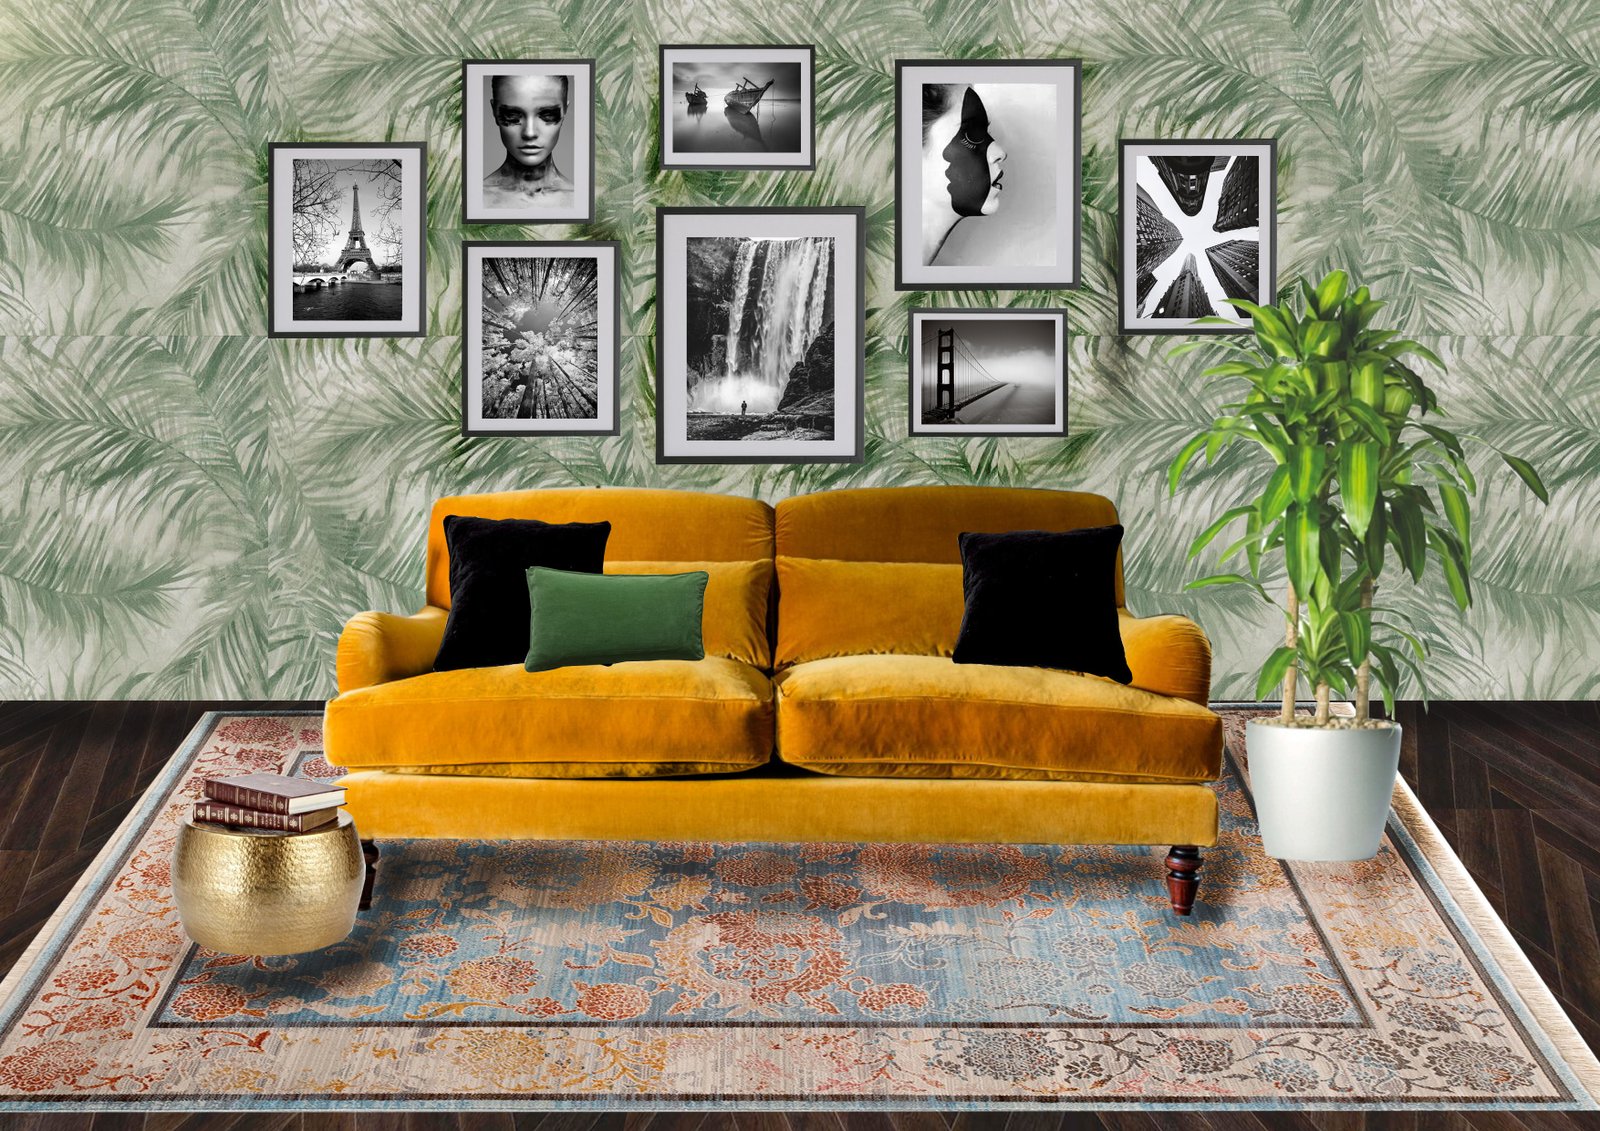 eclectic gallery wall ideas